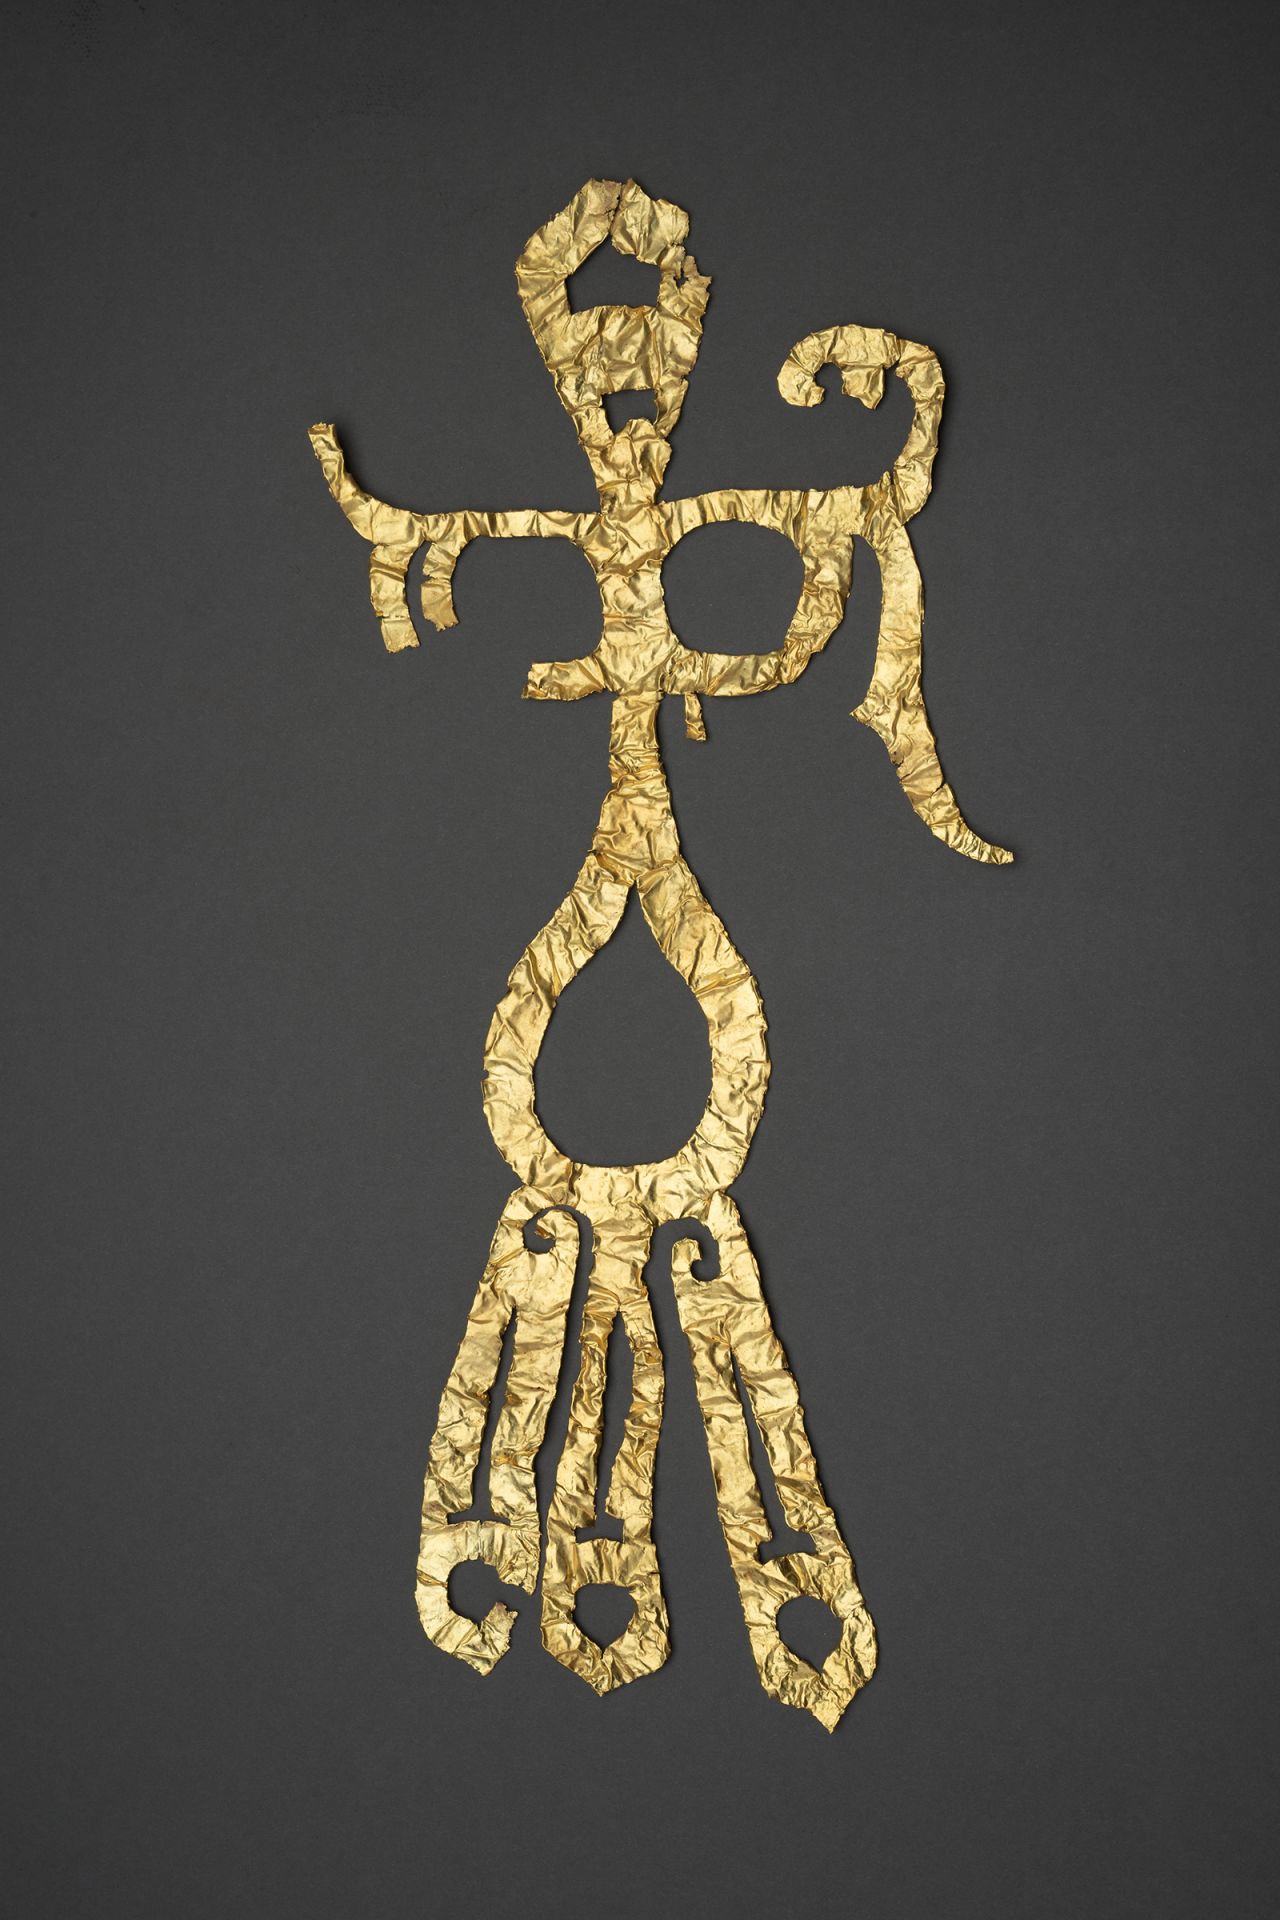 A gold decoration was among more than 500 other items recently unearthed from the site.